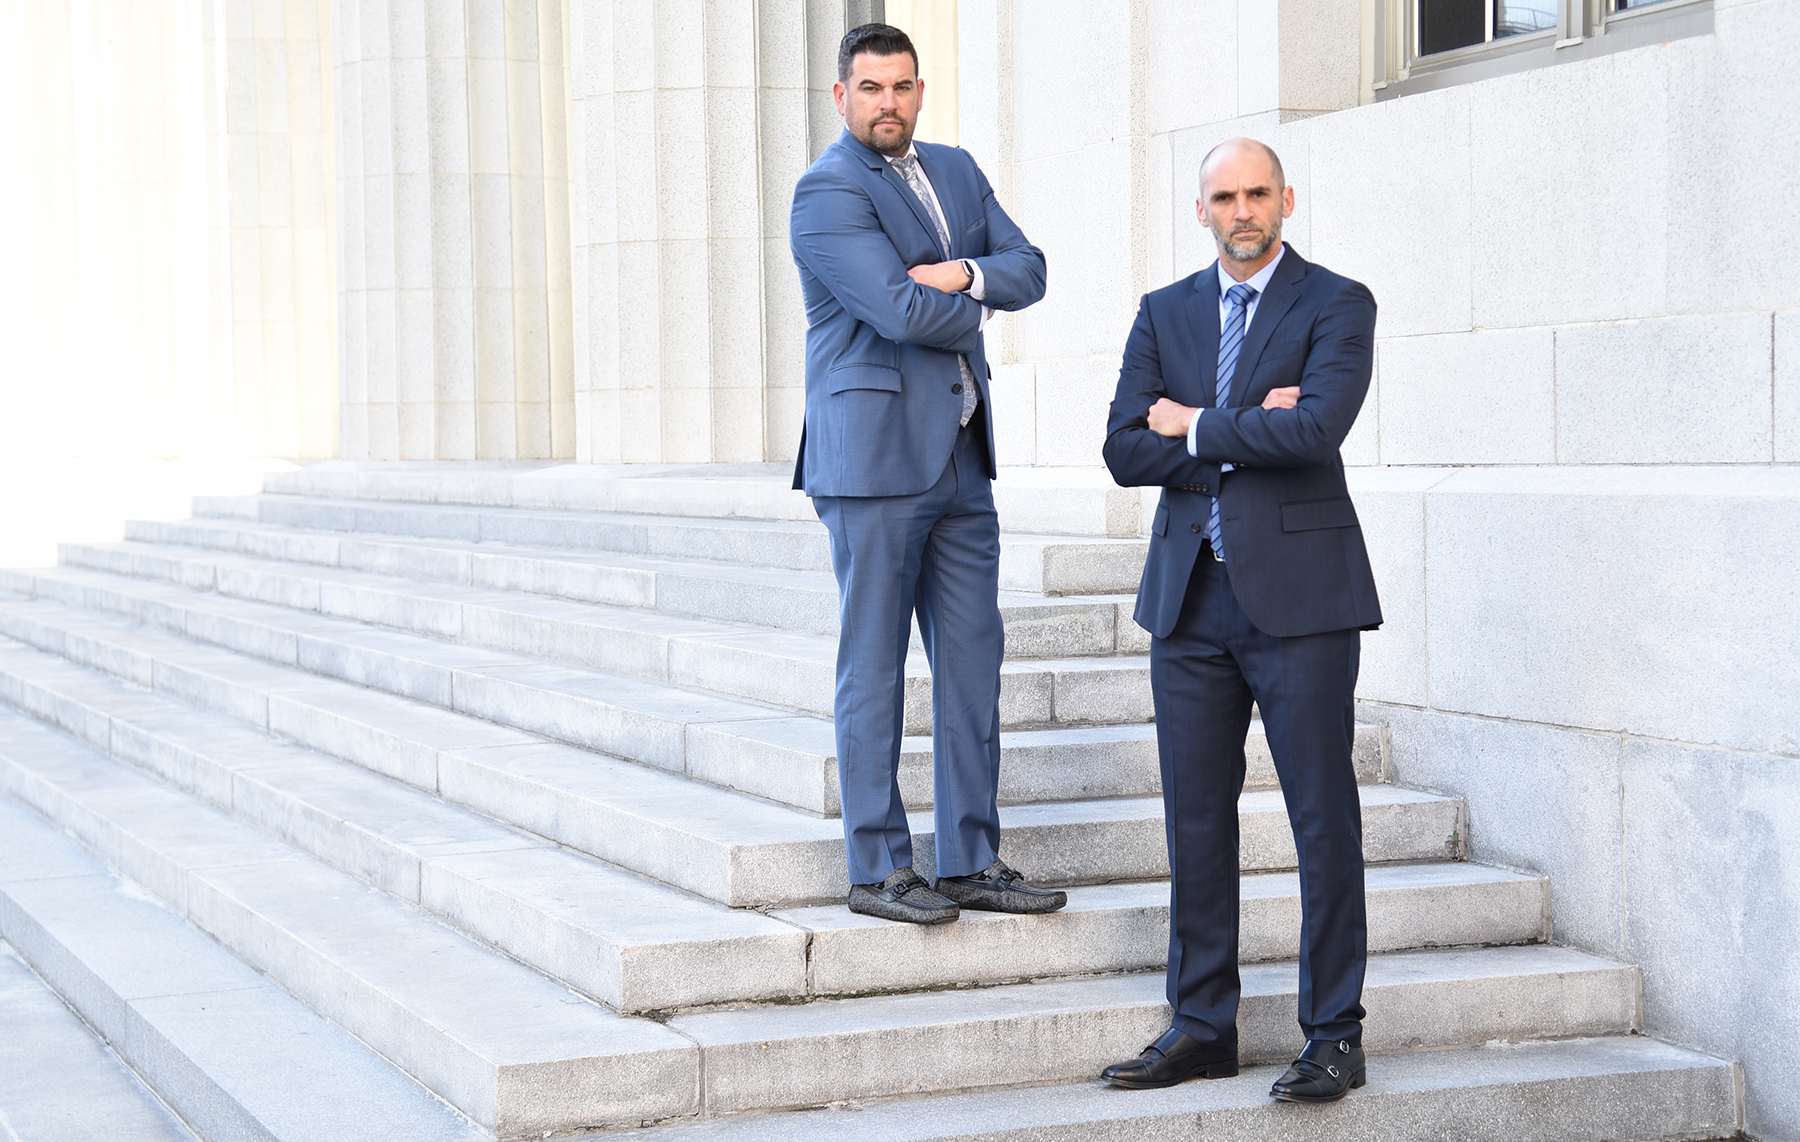 Bram J. Gechtman and Darien McMillan standing on the steps to a courthouse with their arms folded across the front of their bodies